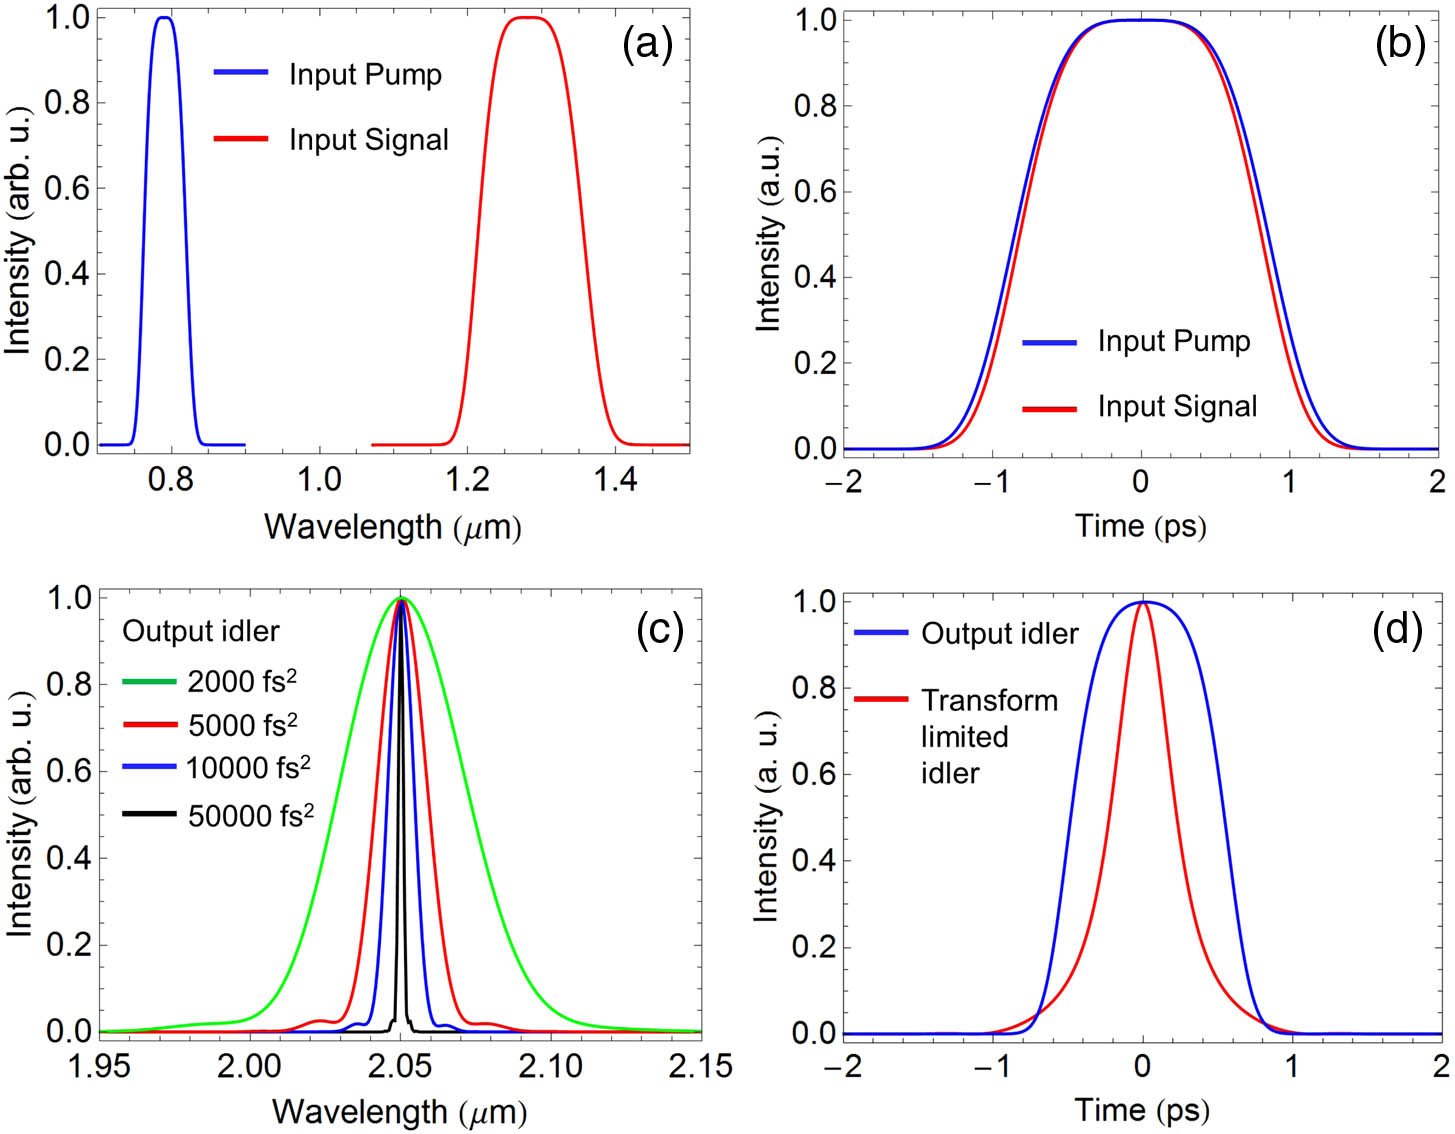 (a) Input pump (blue) and signal (red) spectra. (b) Input pump (blue) and signal (red) pulse shapes in the case of an initial pump and signal chirp of 10000 fs2. (c) Output idler spectra under different pump and signal chirps. (d) Output idler pulse shapes in the case of an initial pump and signal chirp of 10000 fs2 (blue) and transform limited idler pulse shape (red).